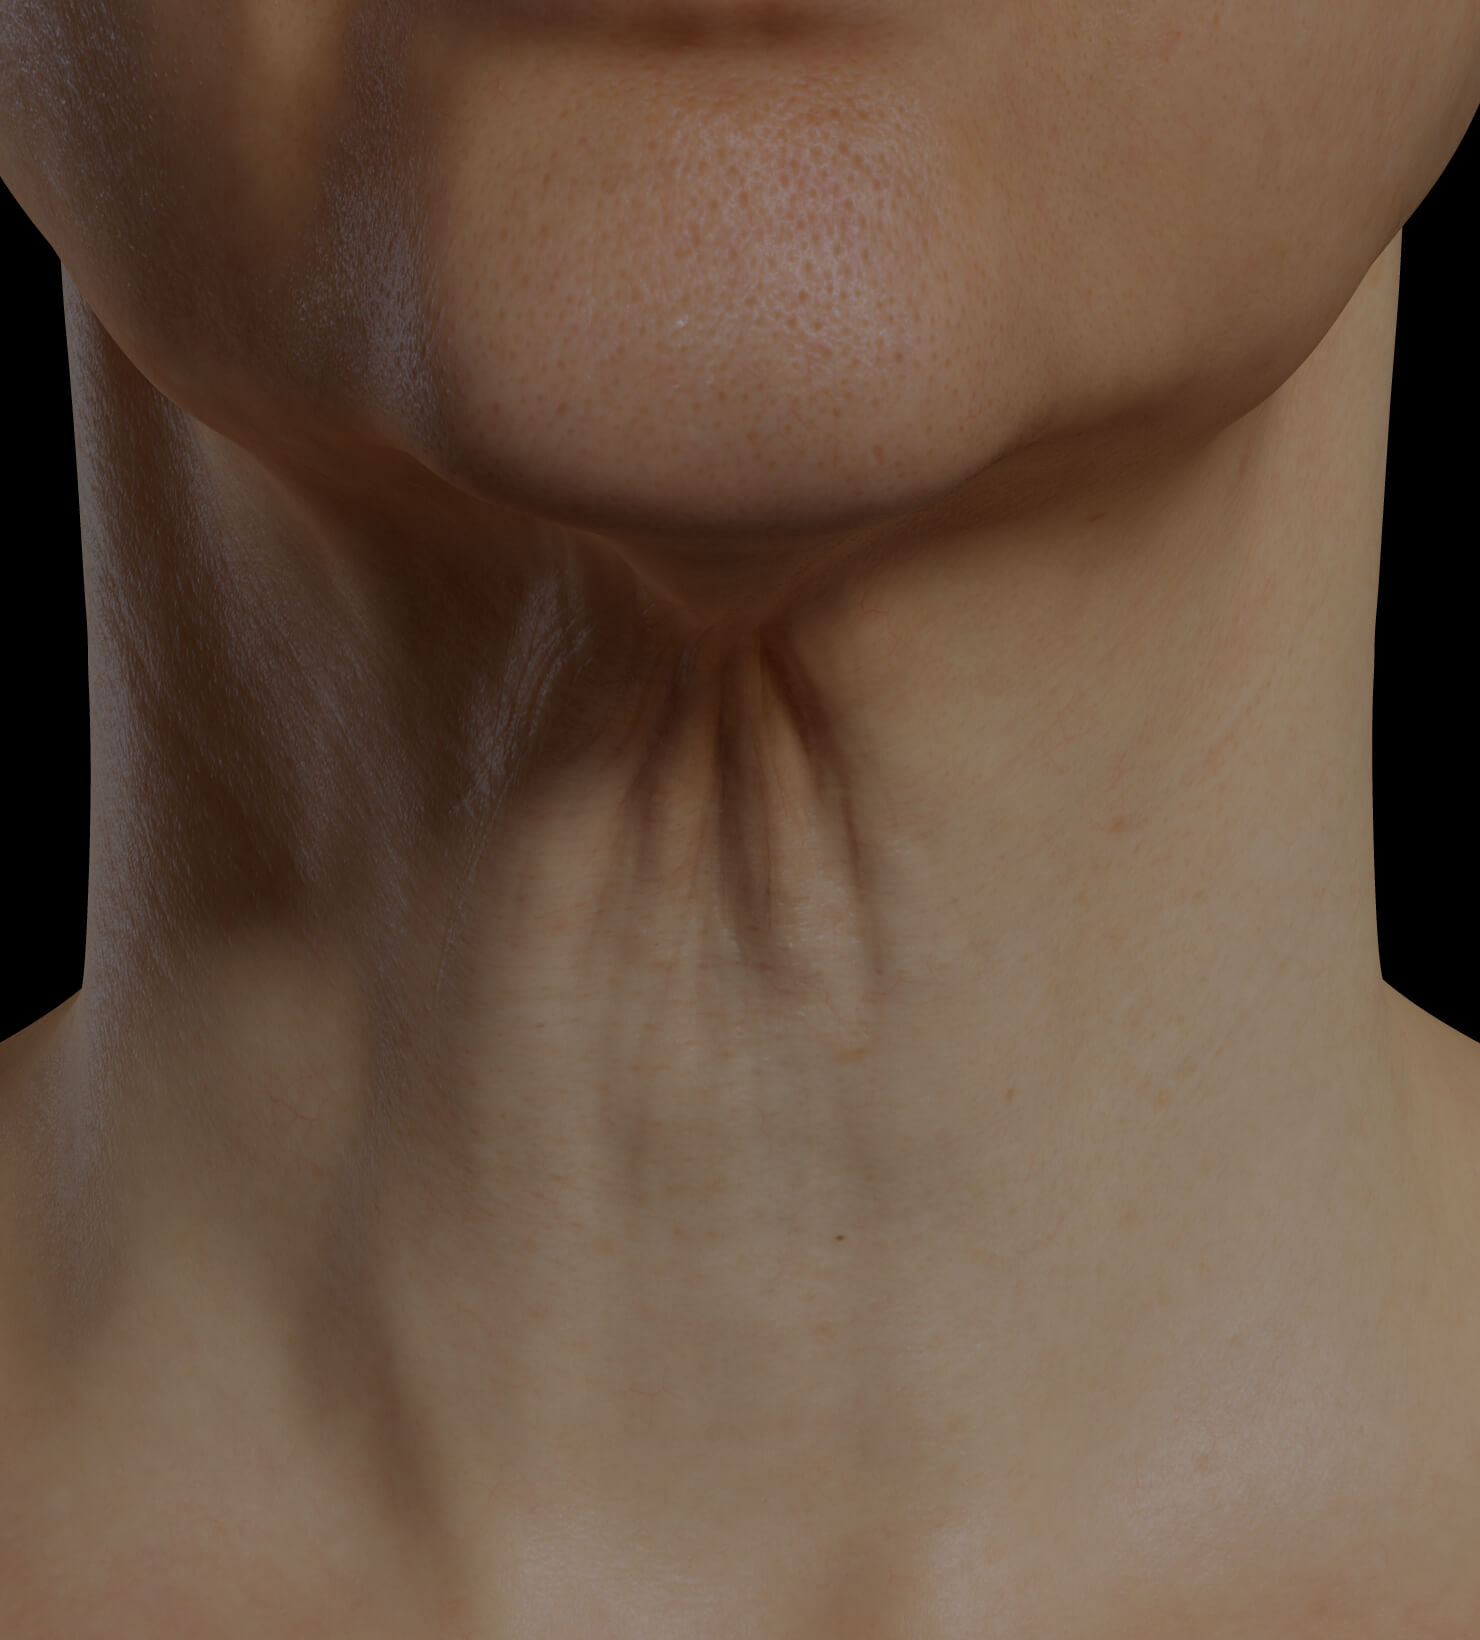 Clinique Chloé female patient with neck skin laxity treated with the Fotona 4D laser for neck skin tightening